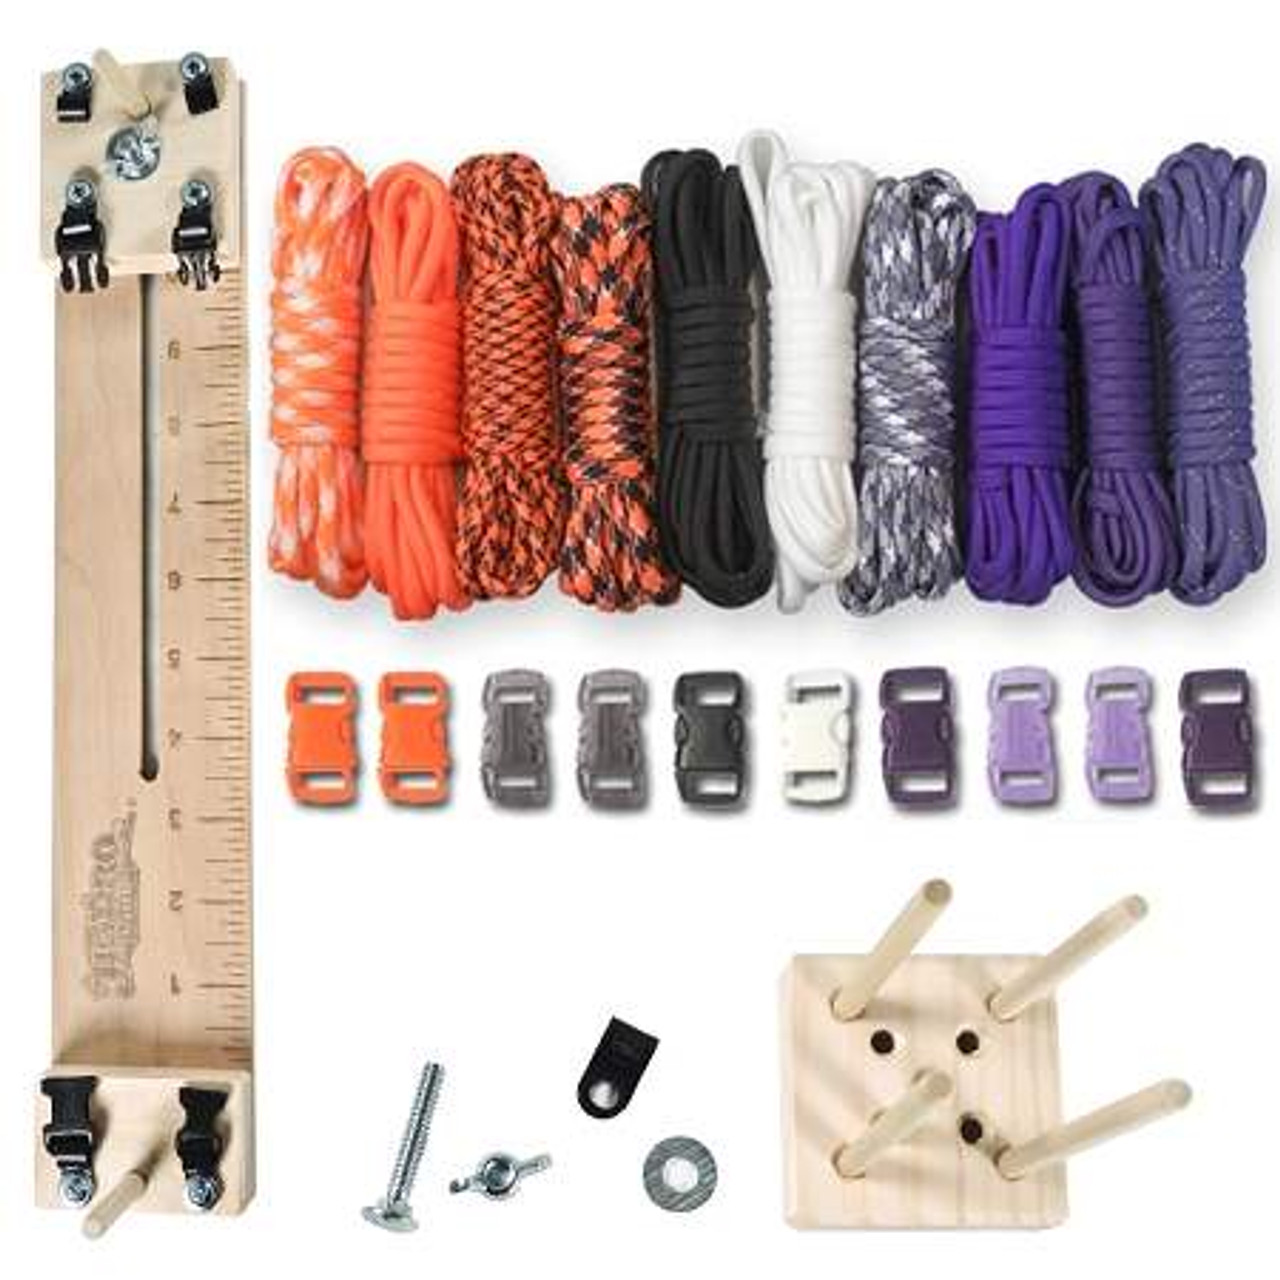 Paracord Combo Crafting Kit with a 10 Pocket Pro Jig - Scouting